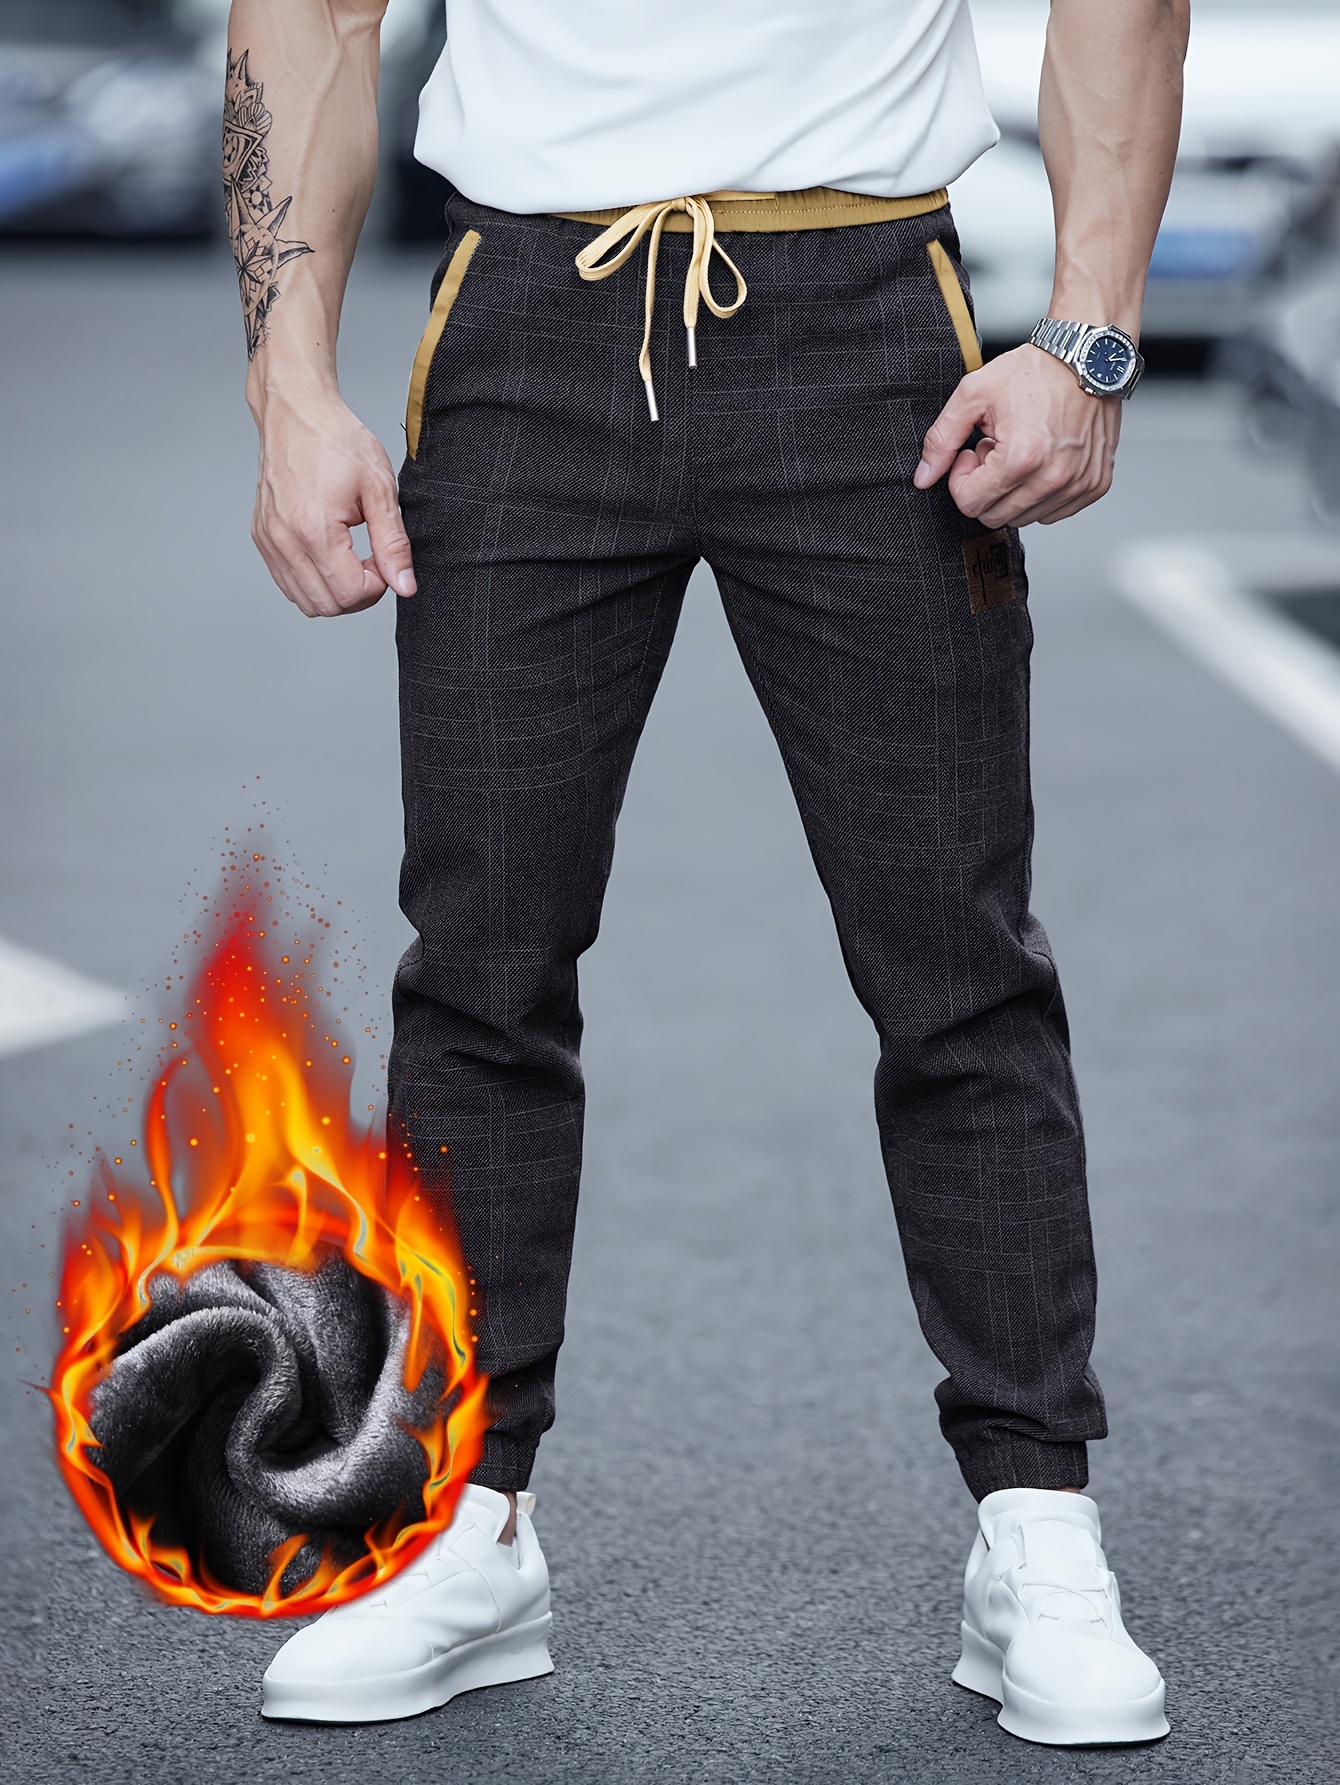 Men's Casual Fleece Lined Jeans, Chic Warm Classic Design Jeans For Fall  Winter